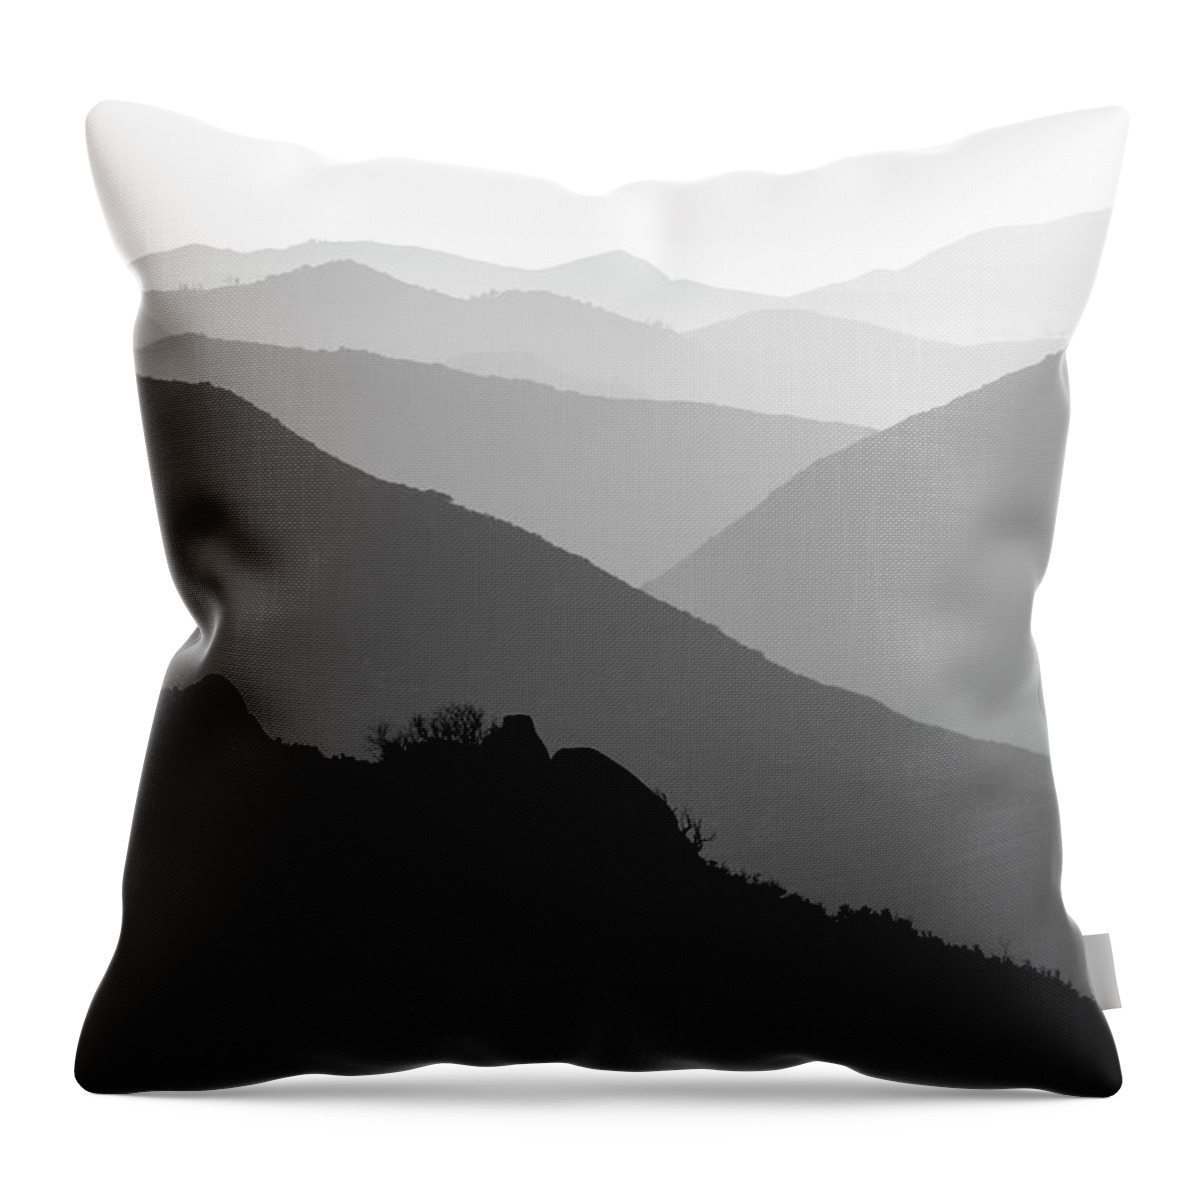 San Diego Throw Pillow featuring the photograph San Diego Mountain Layers by William Dunigan